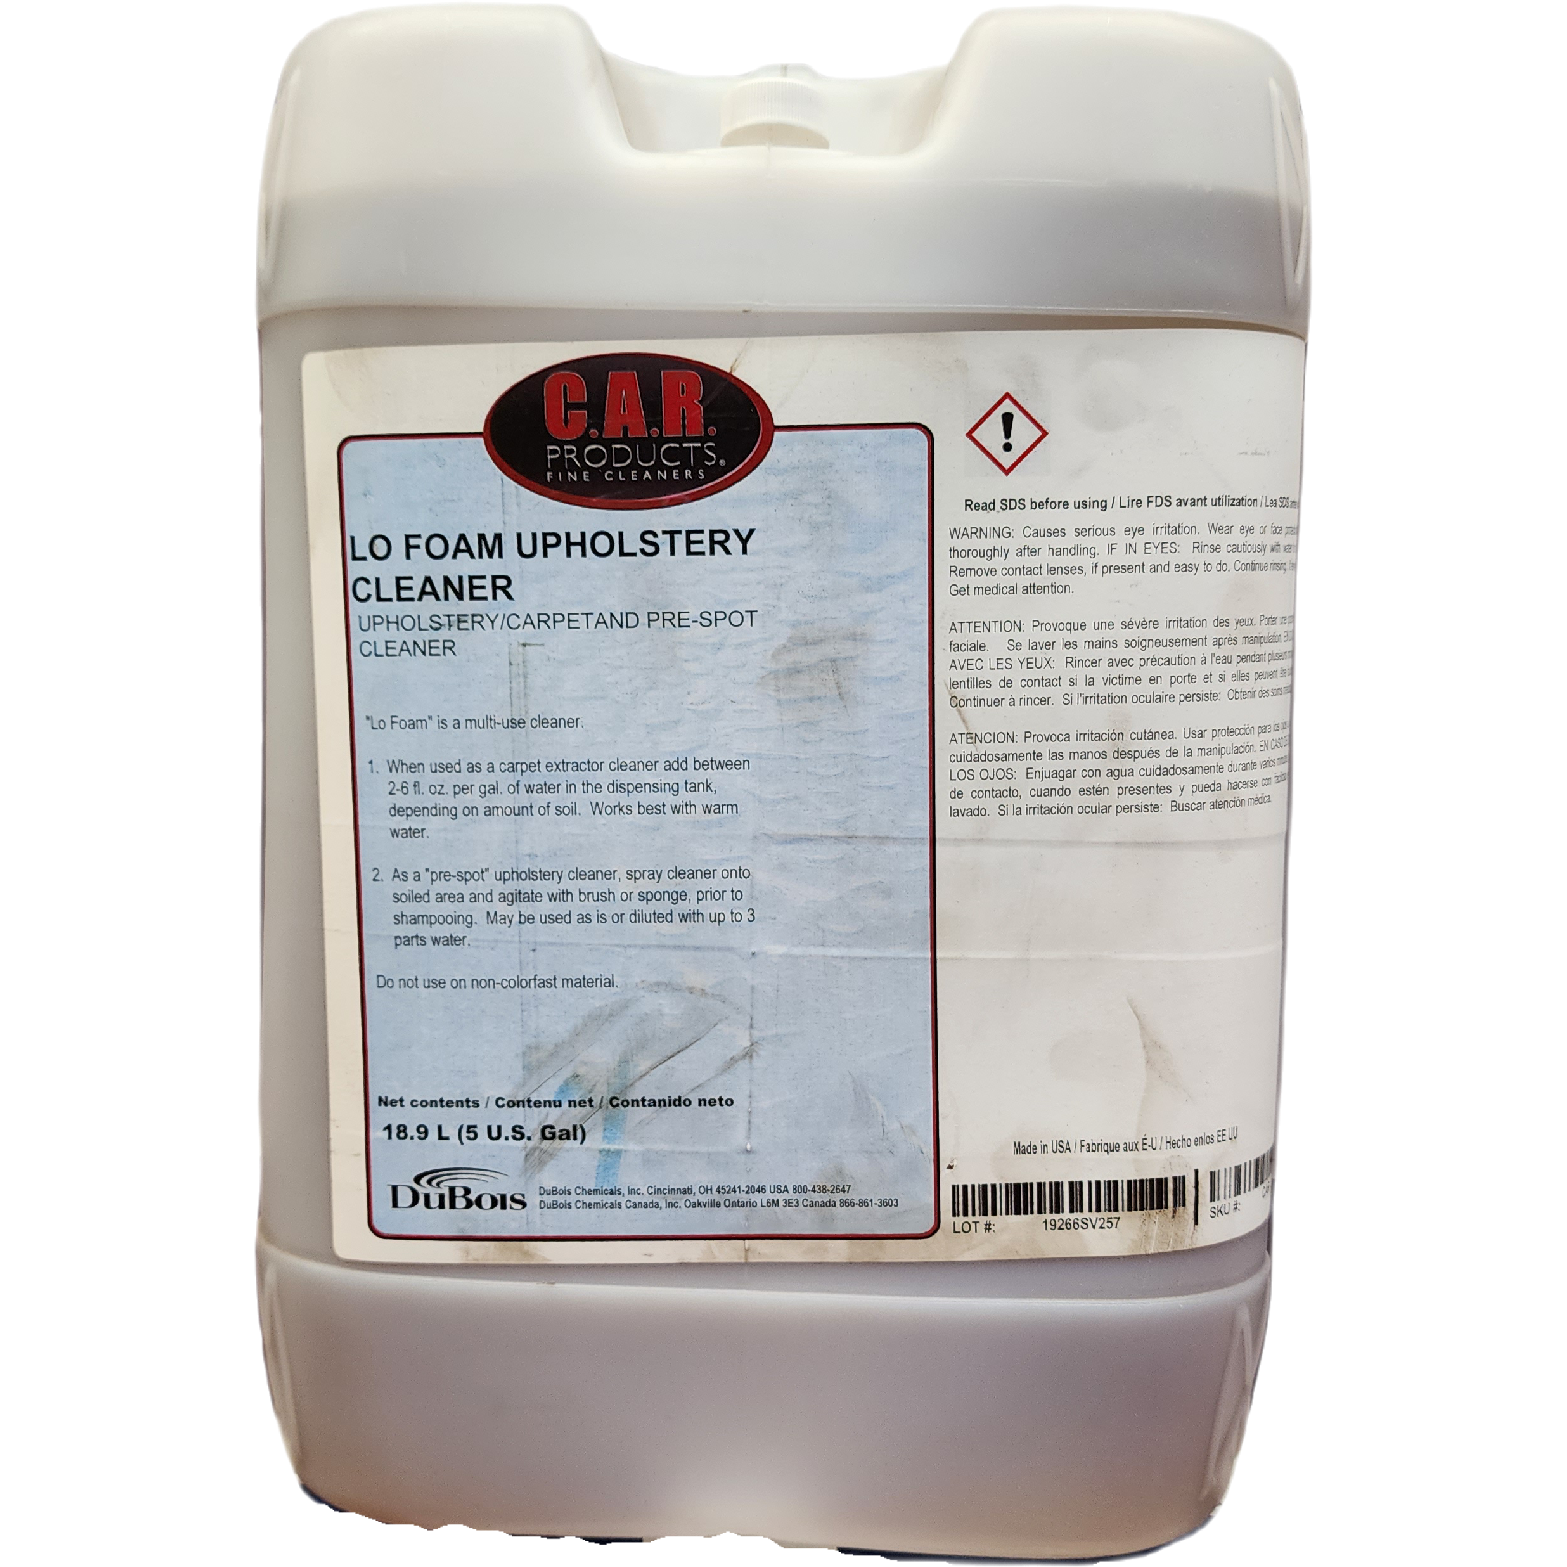 XCP CAR-18205 CAR Products Lo Foam Upholstery/Carpet & Pre-Spot Cleaner (5 gal)